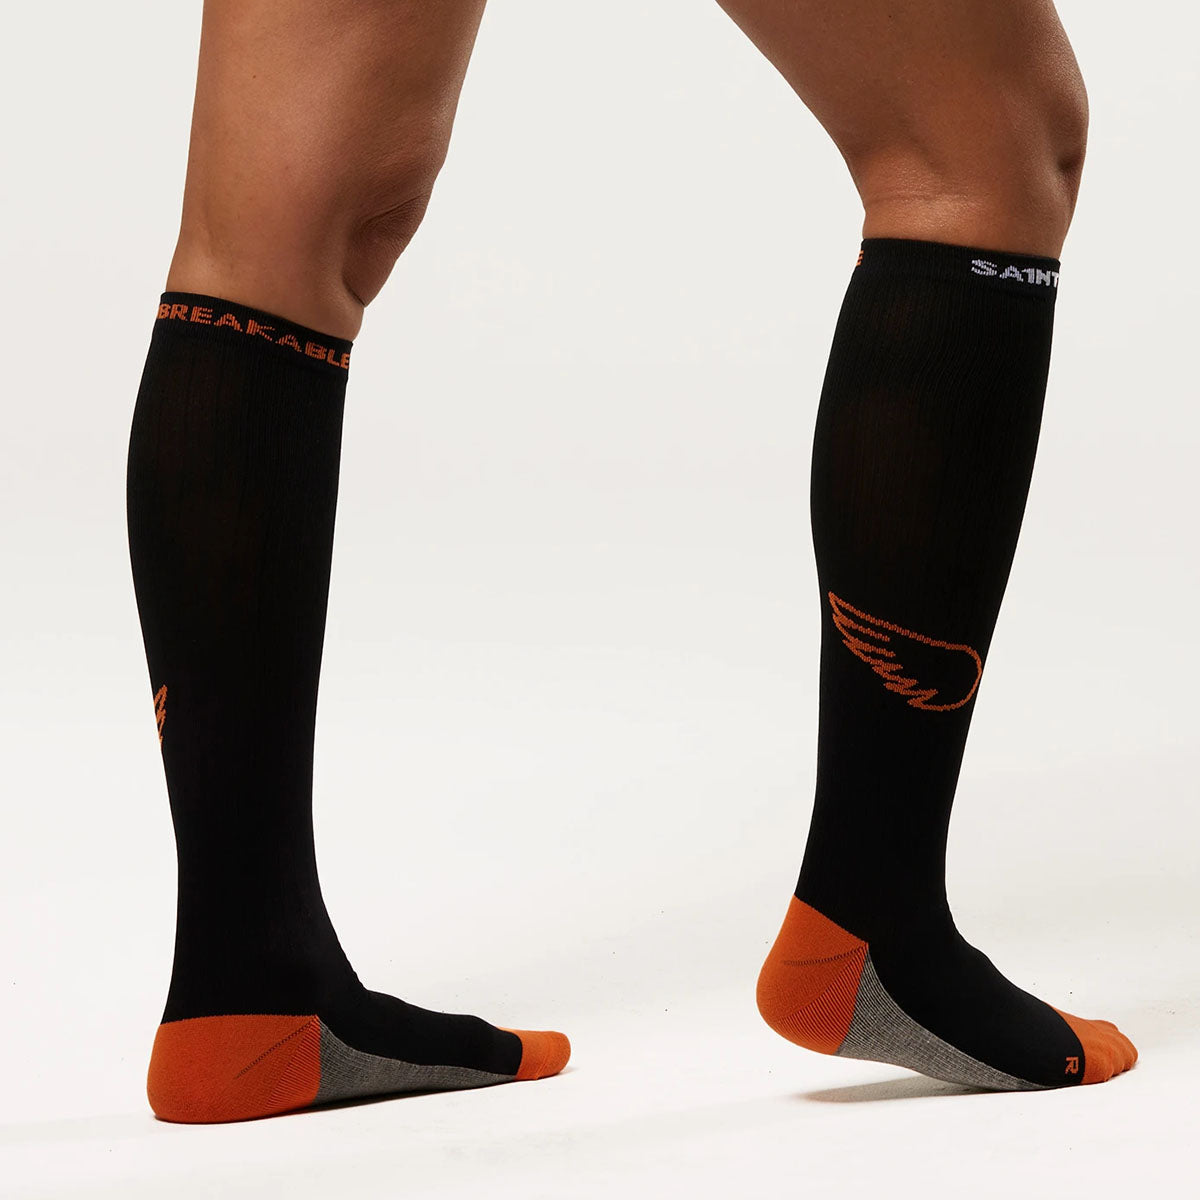 The Benefits Of Wearing Compression Socks When You Fly - March